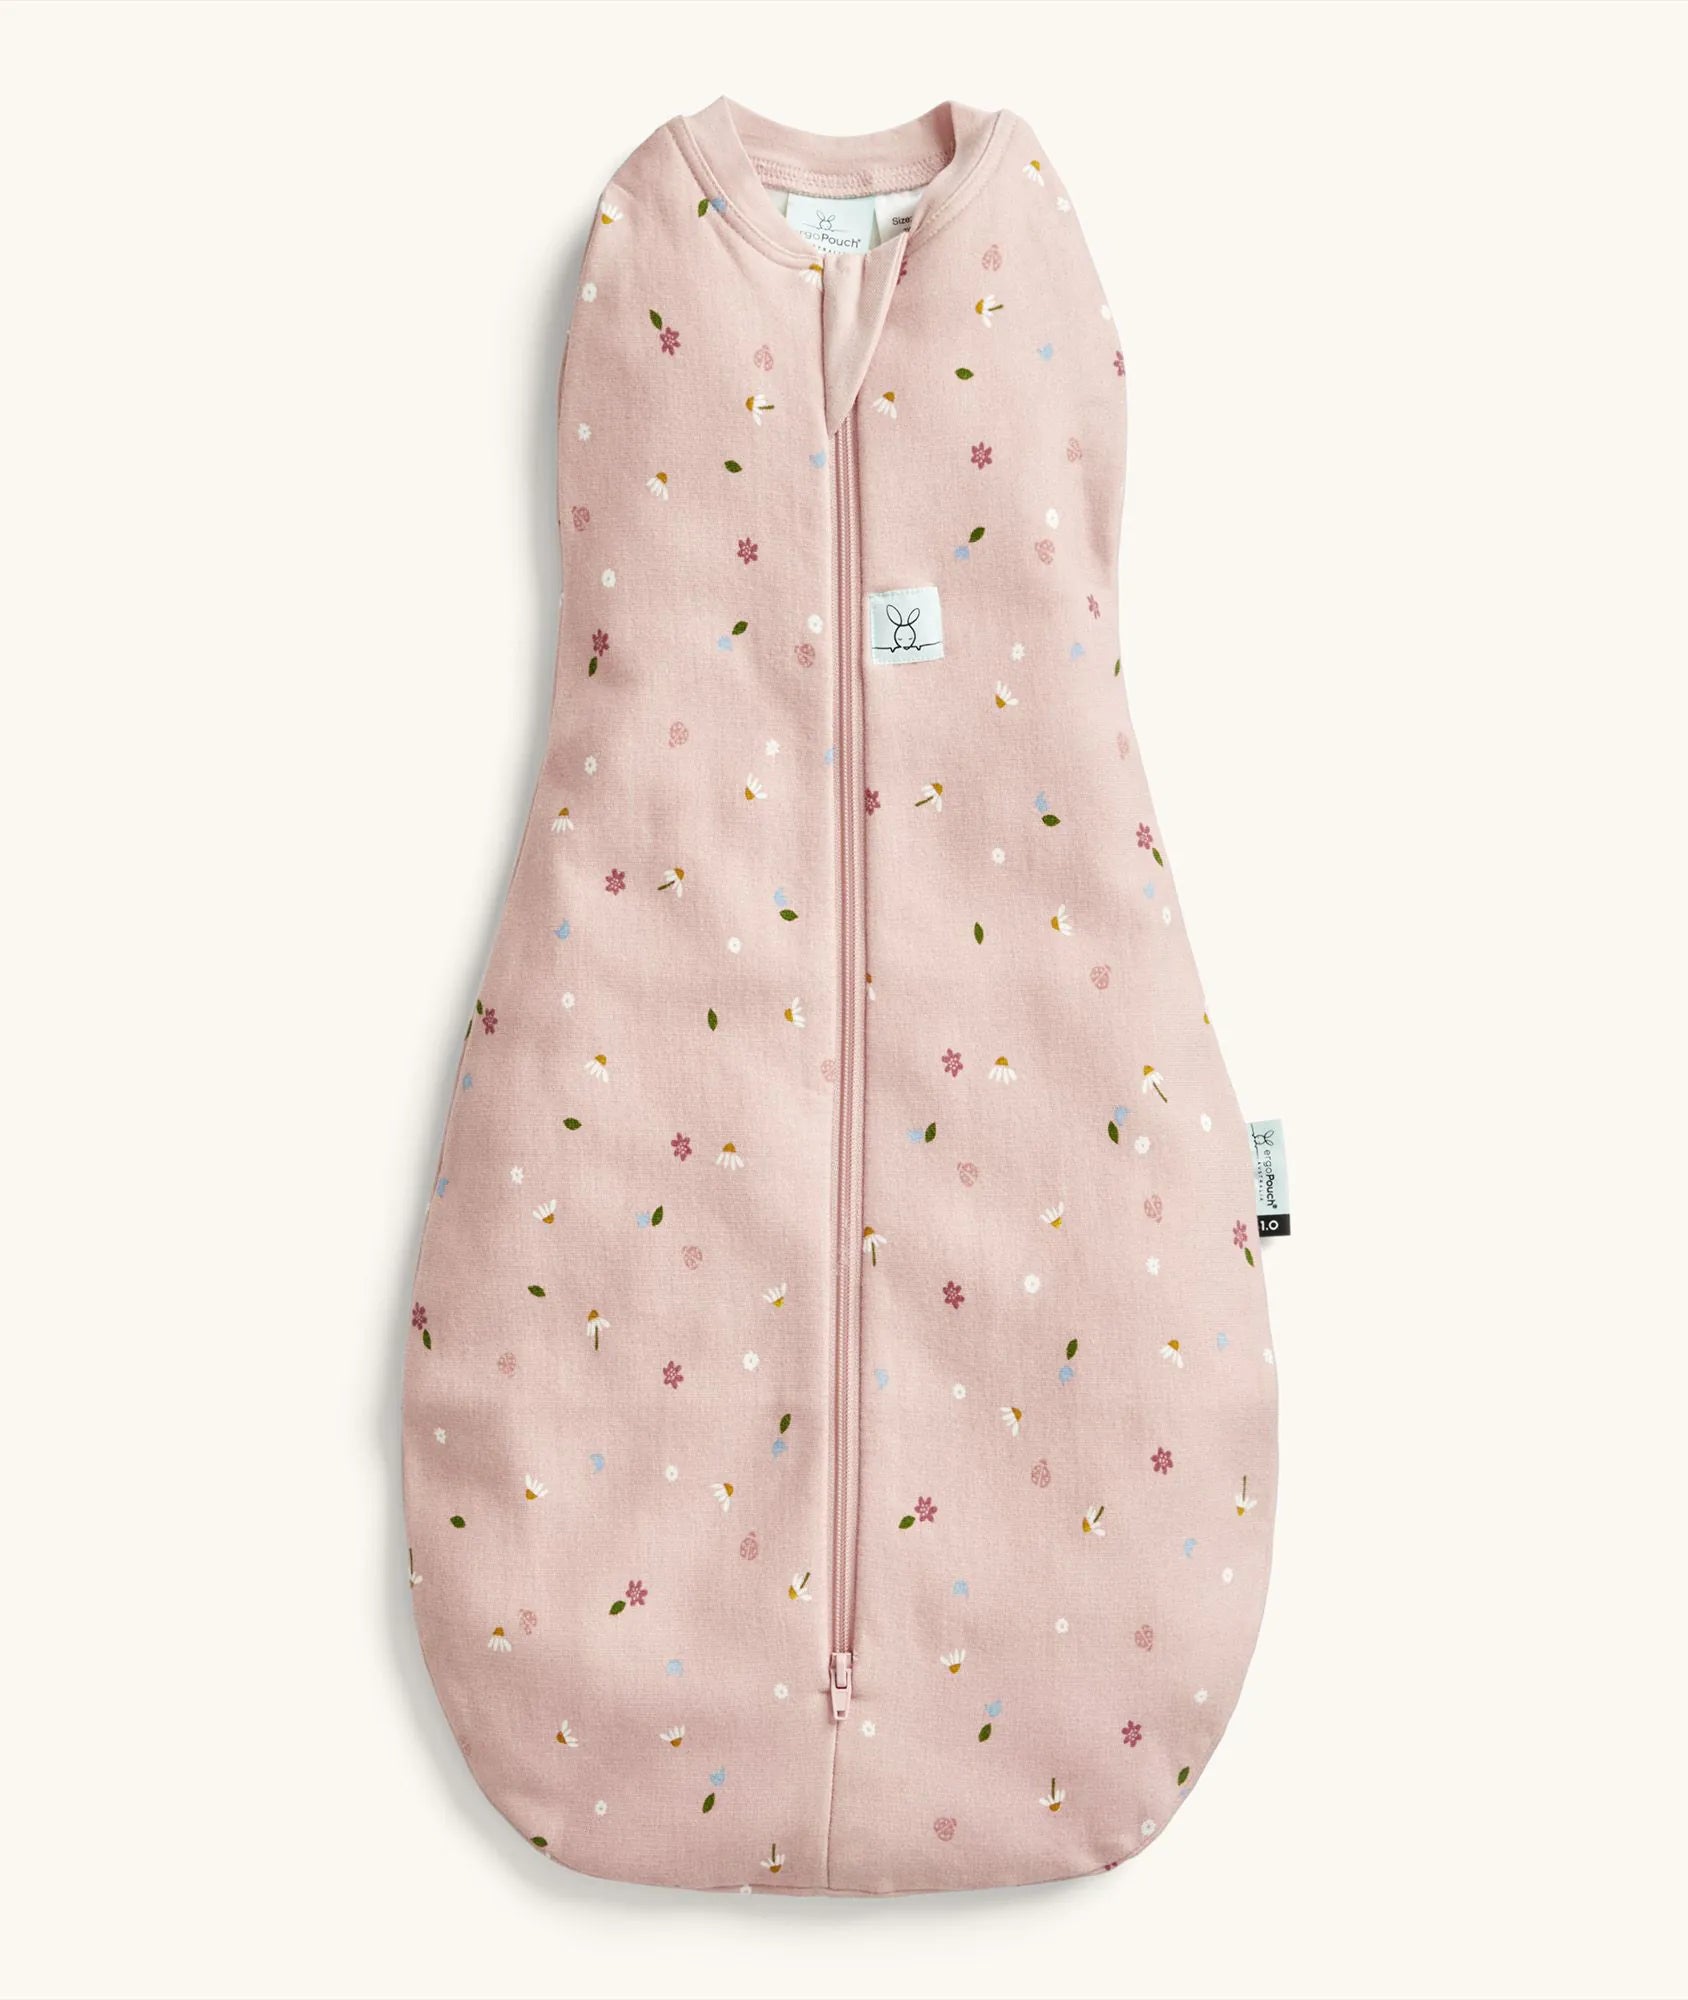 ErgoPouch Cocoon Swaddle Sack 0.2 TOG, Daisies